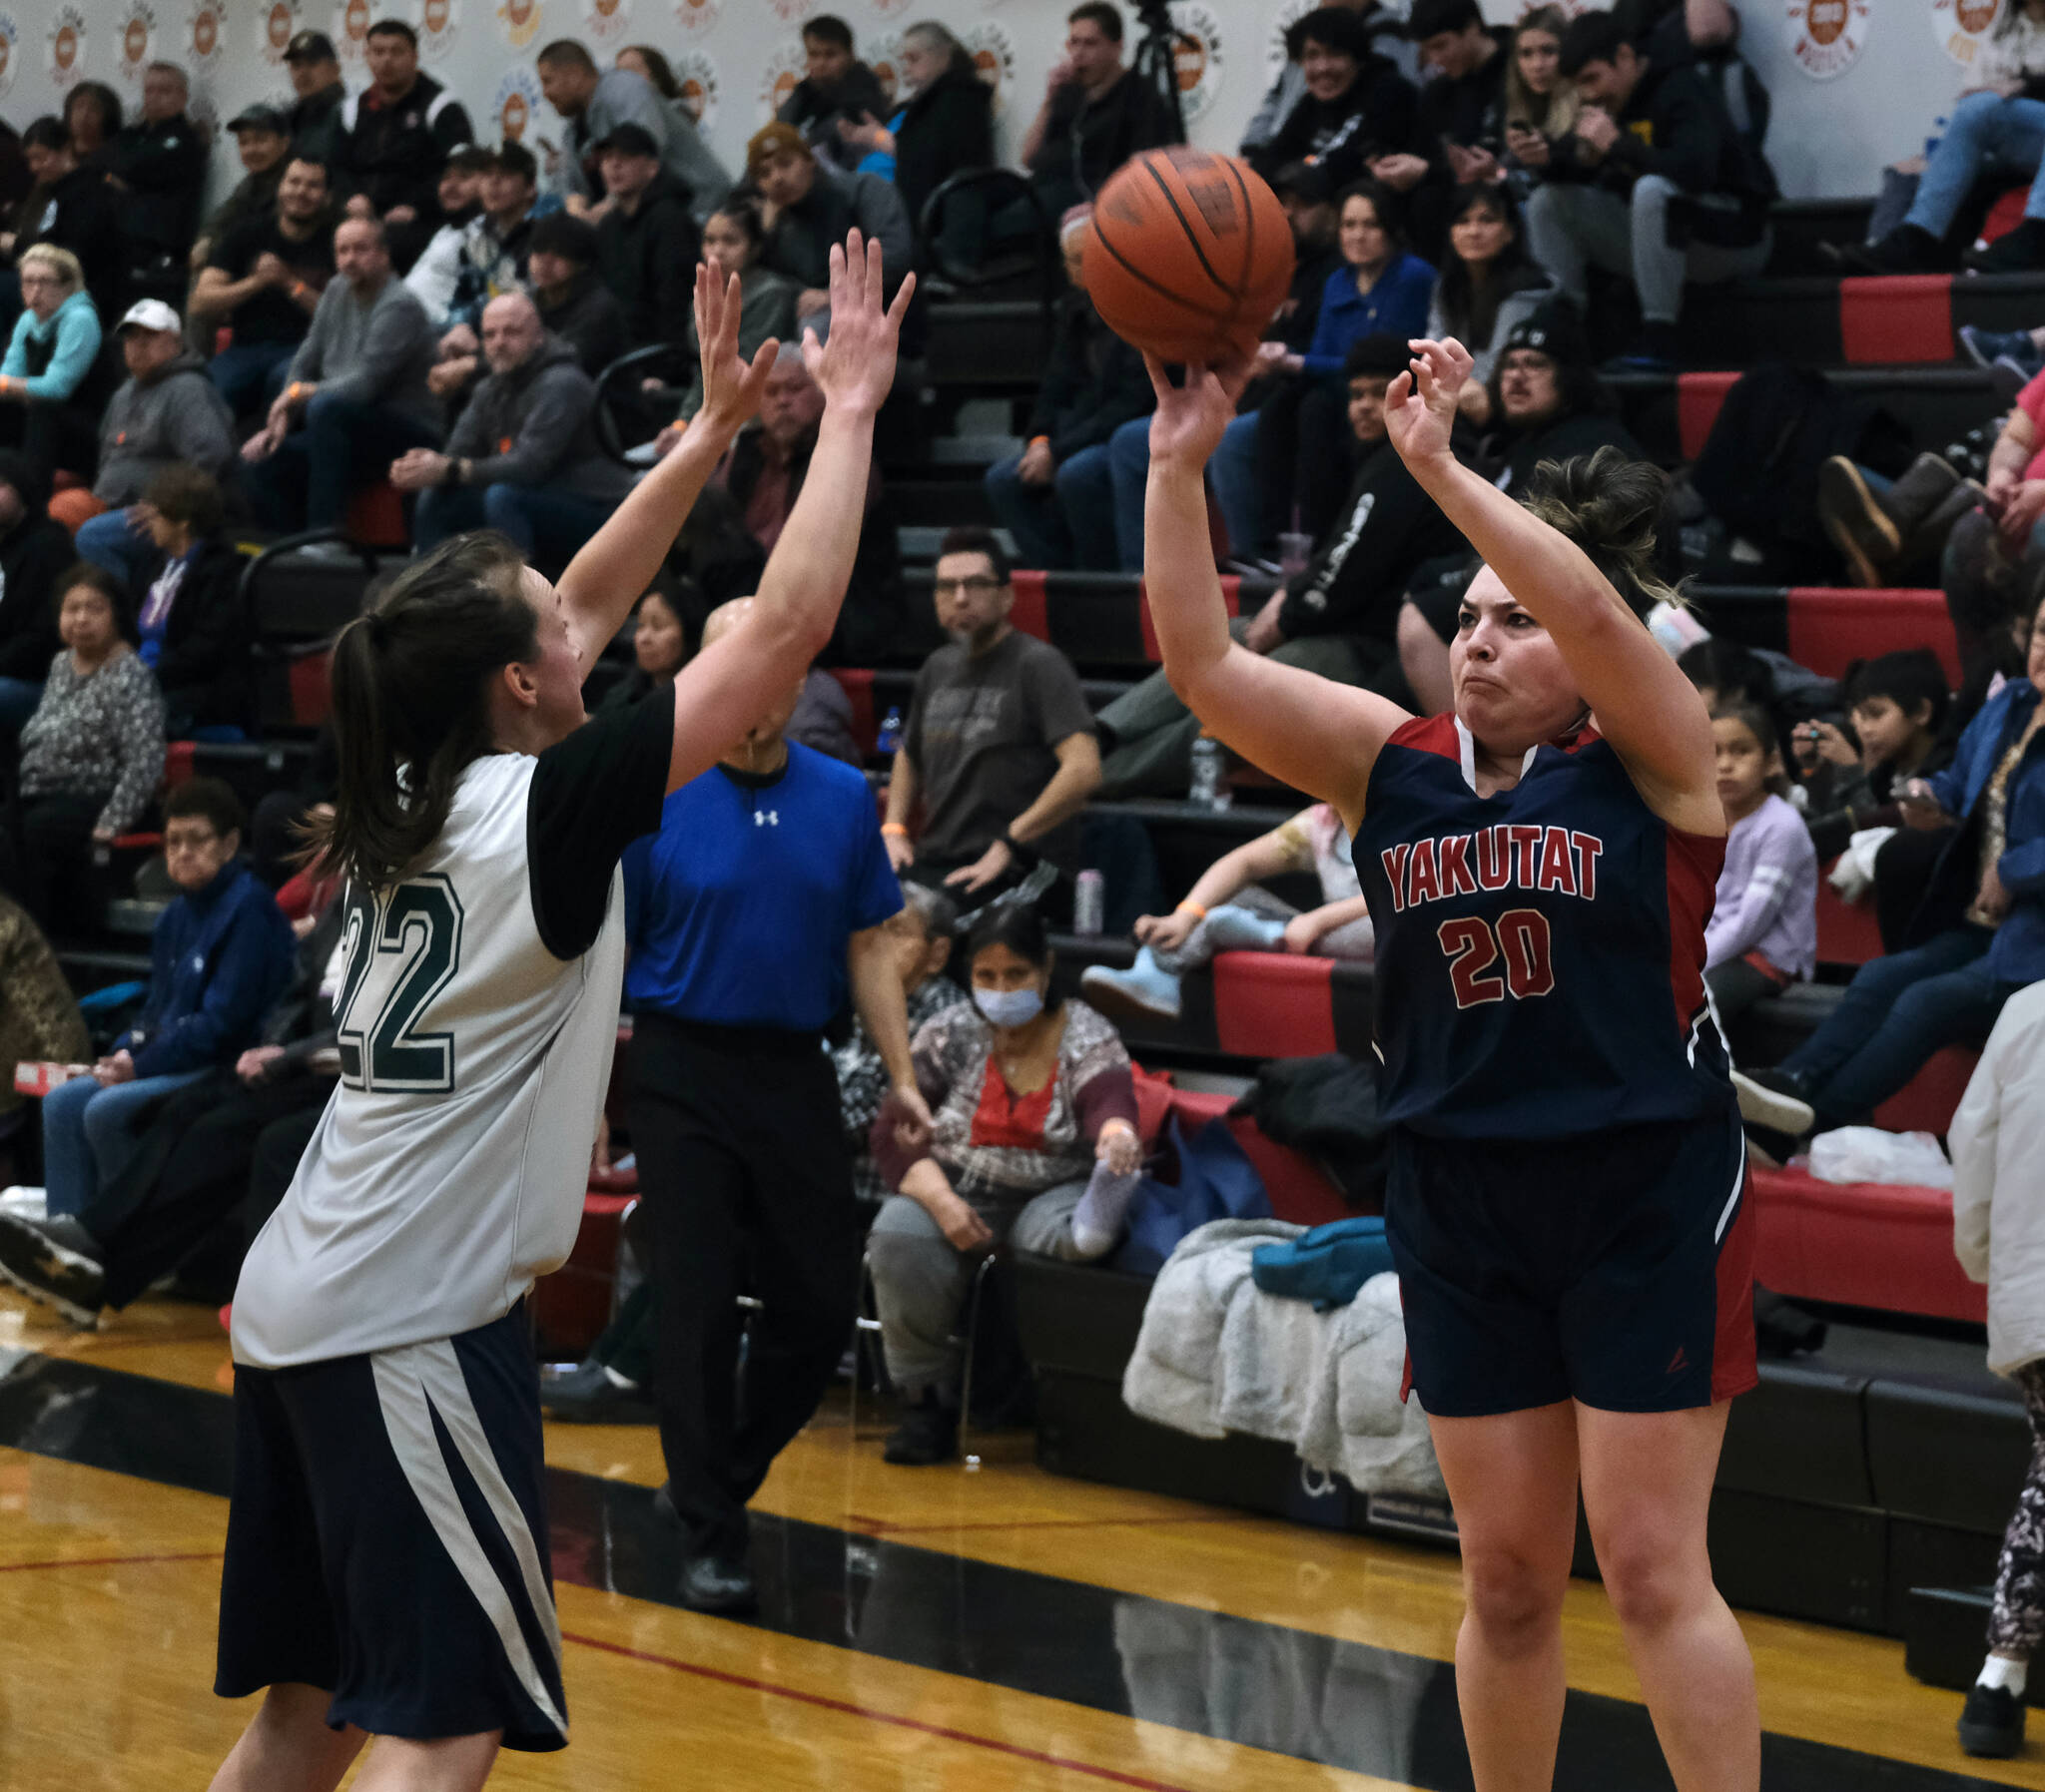 Yakutat’s Rose Fraker (20) shoots over POW’s Nani Weimer (22) during the Gold Medal Basketball Tournament, Saturday, March 25, at Juneau-Douglas High School: Yadaa.at Kalé. (Klas Stolpe/For the Juneau Empire)